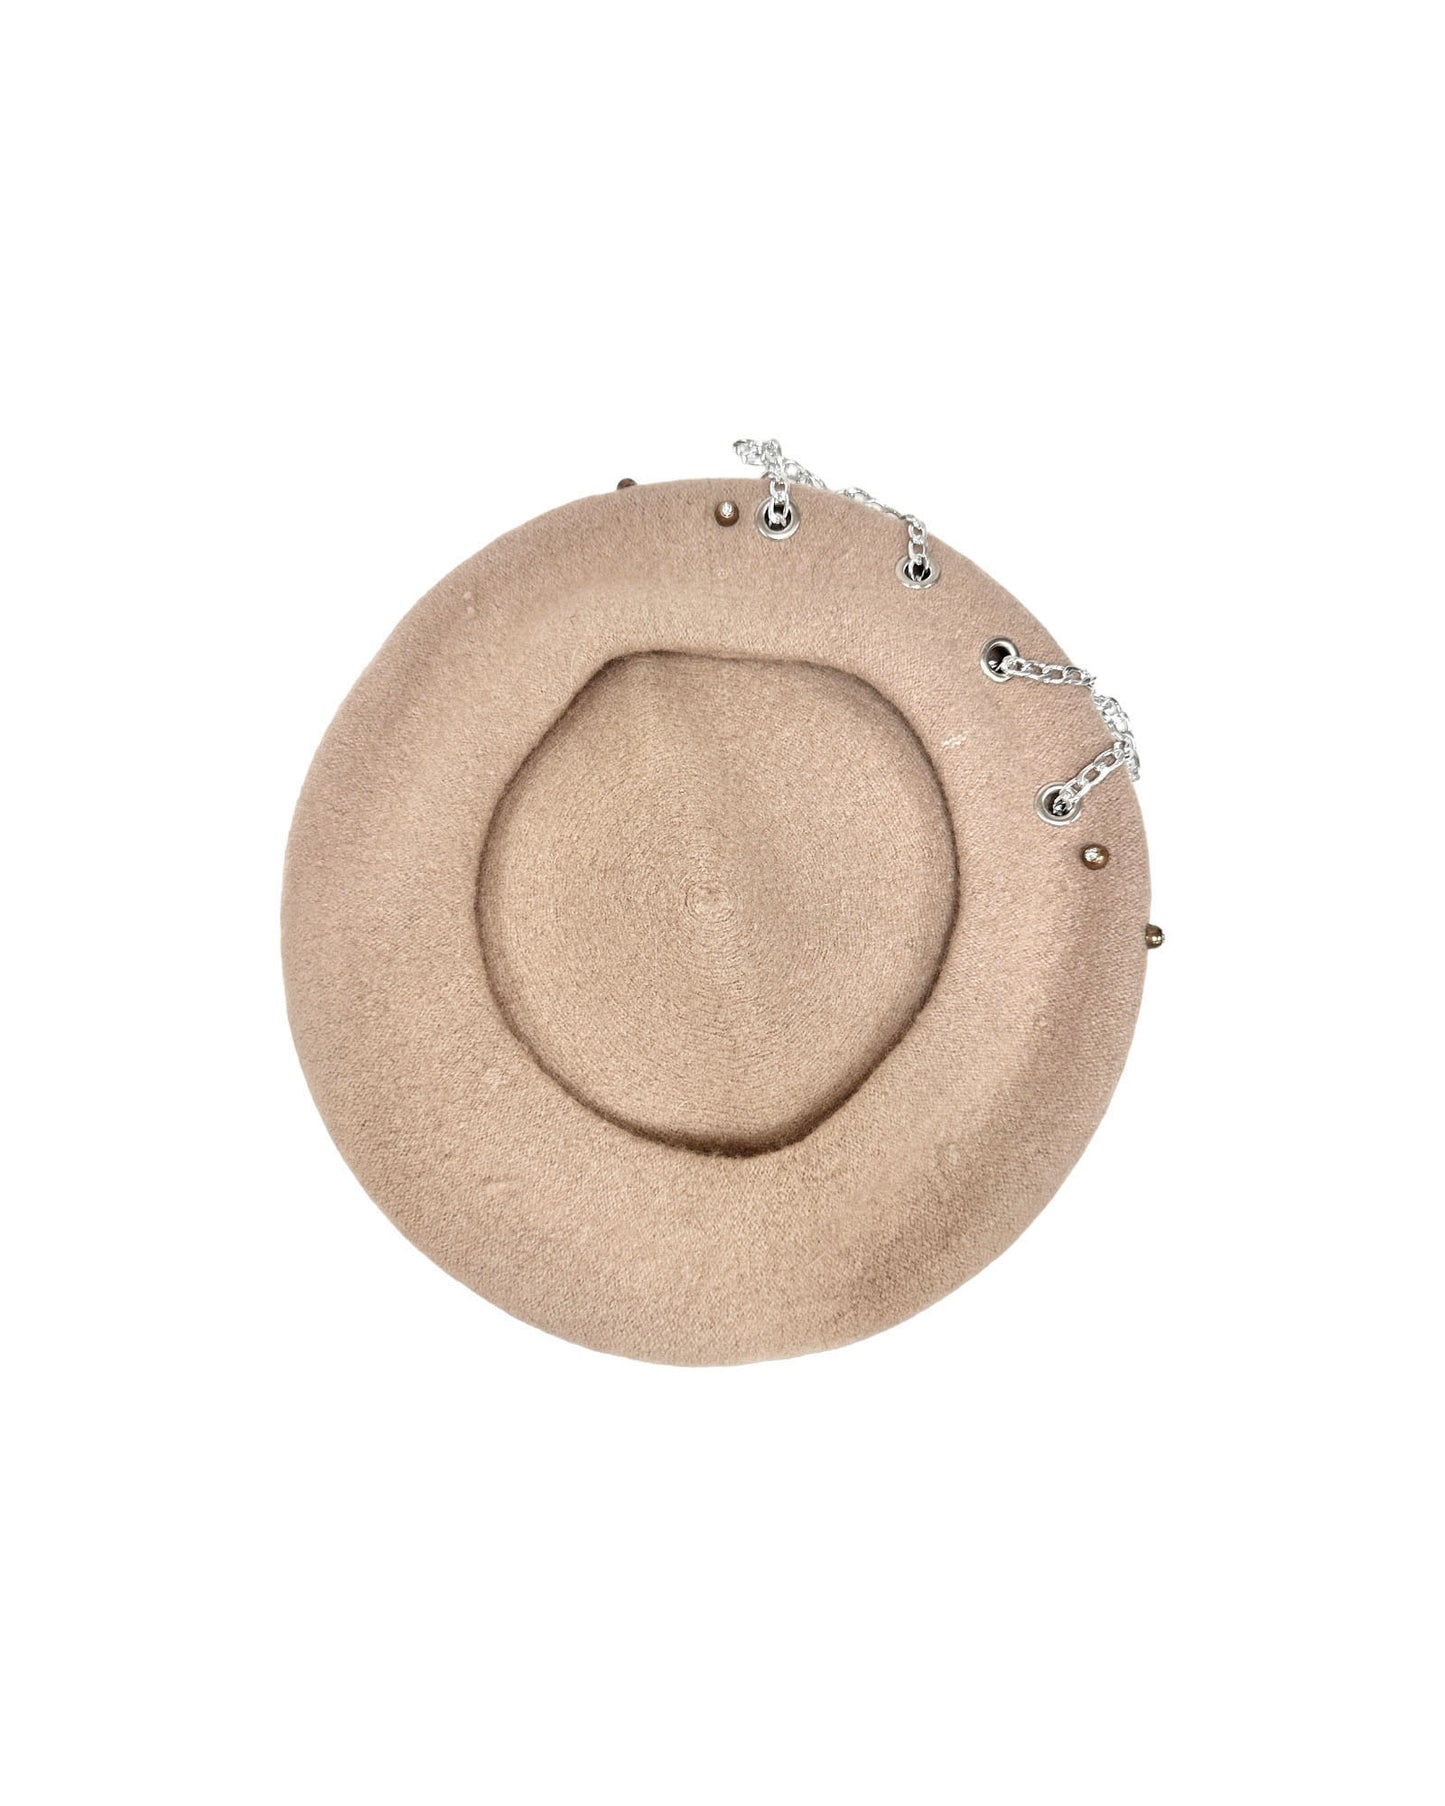 beige chain & studs wool blended beret